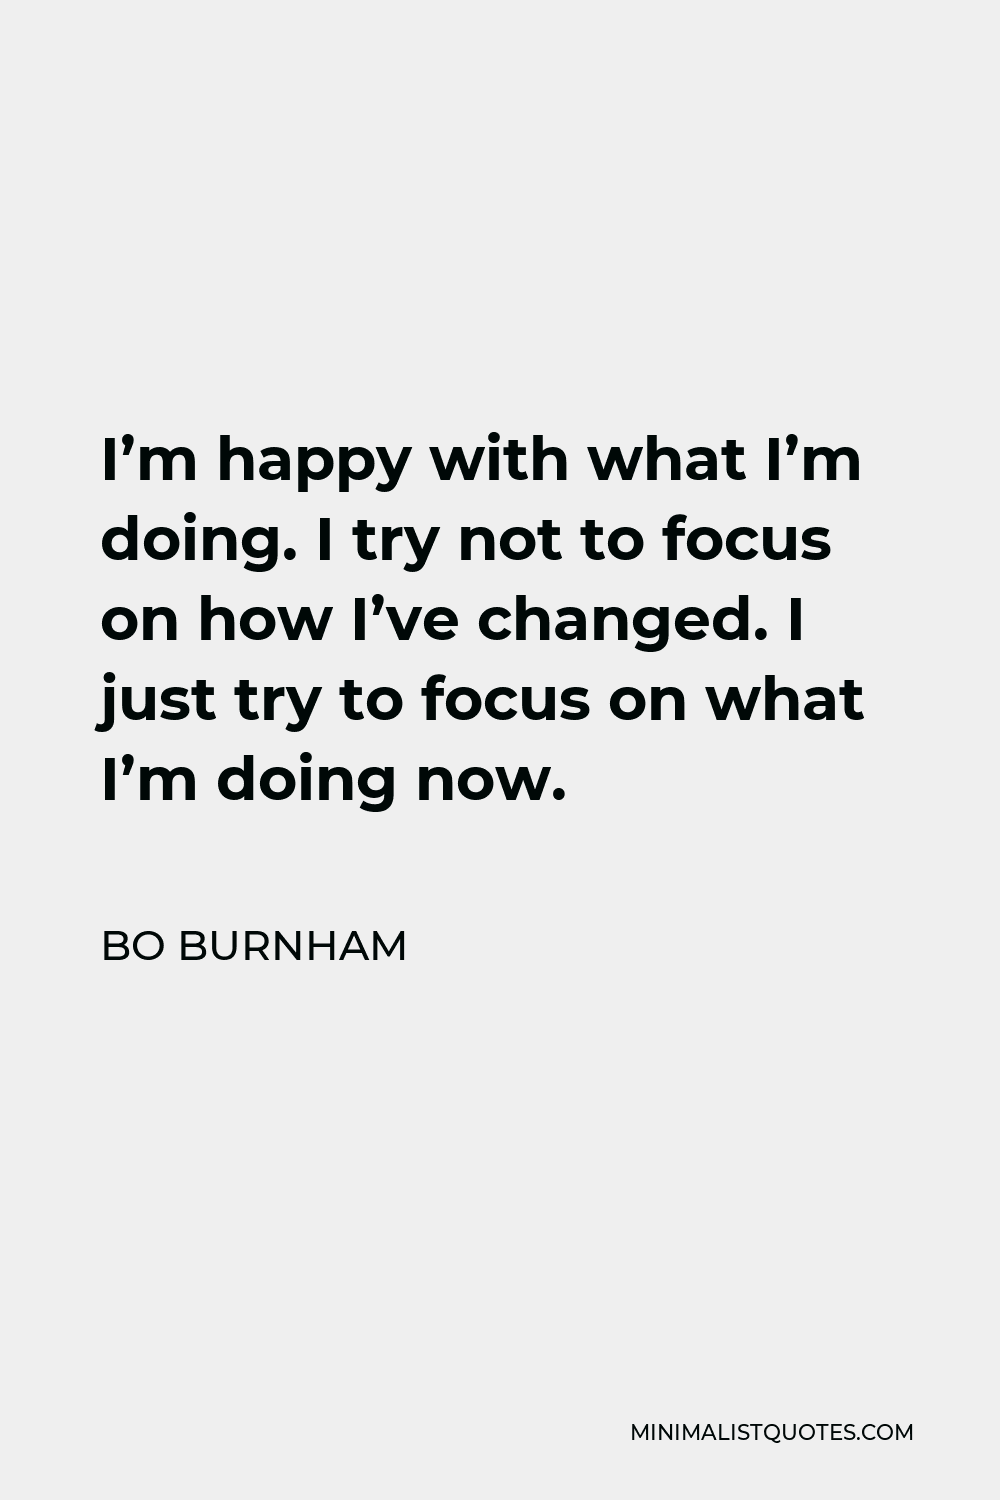 Bo Burnham Quote - I’m happy with what I’m doing. I try not to focus on how I’ve changed. I just try to focus on what I’m doing now.